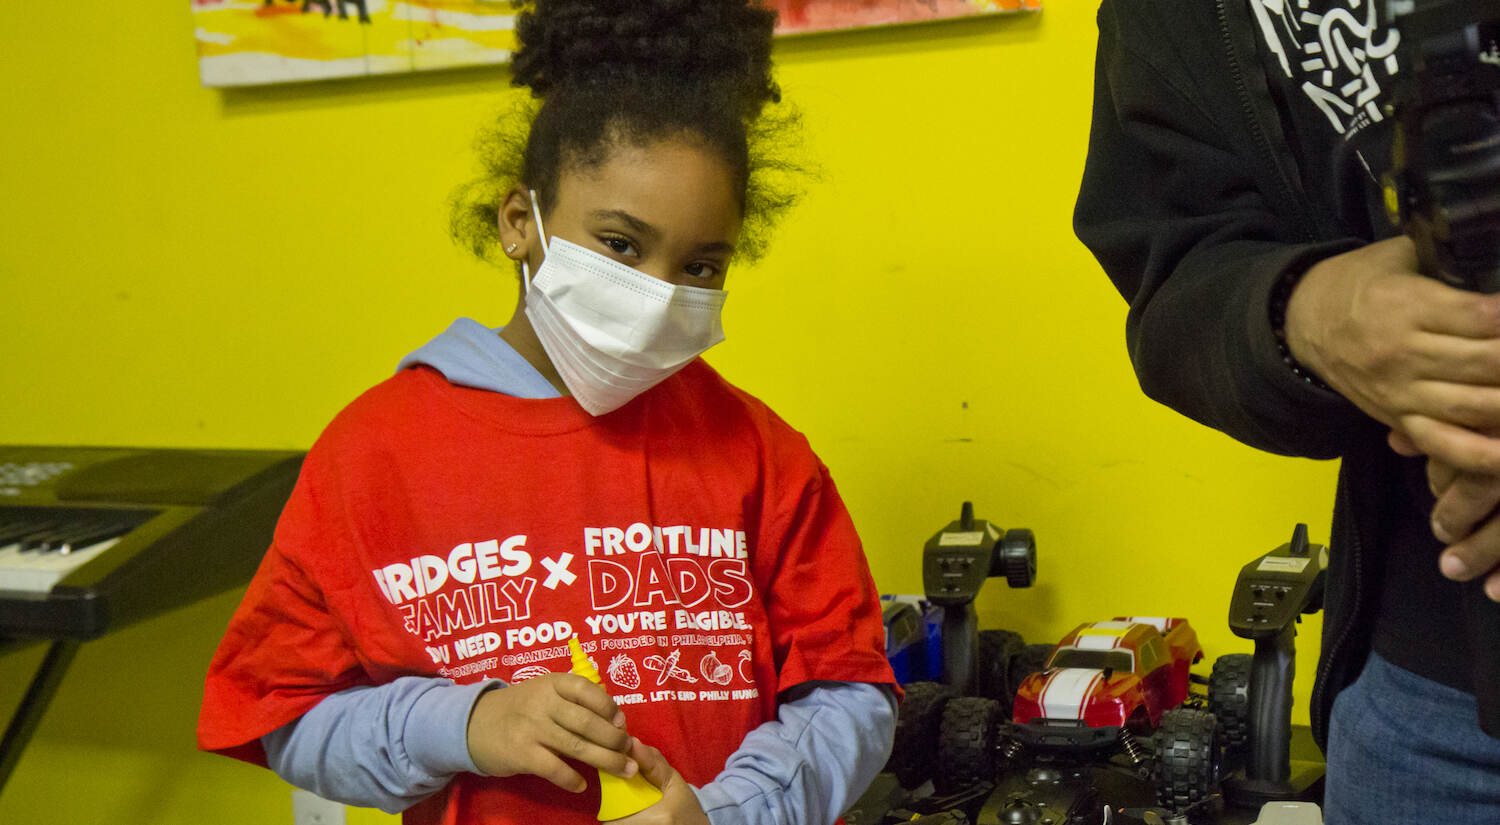 Lydiana Veneziale, 7, was adamant about having her photo taken with the drones and robotic toys at The Teen Safe Space in Philadelphia. (Kimberly Paynter/WHYY)